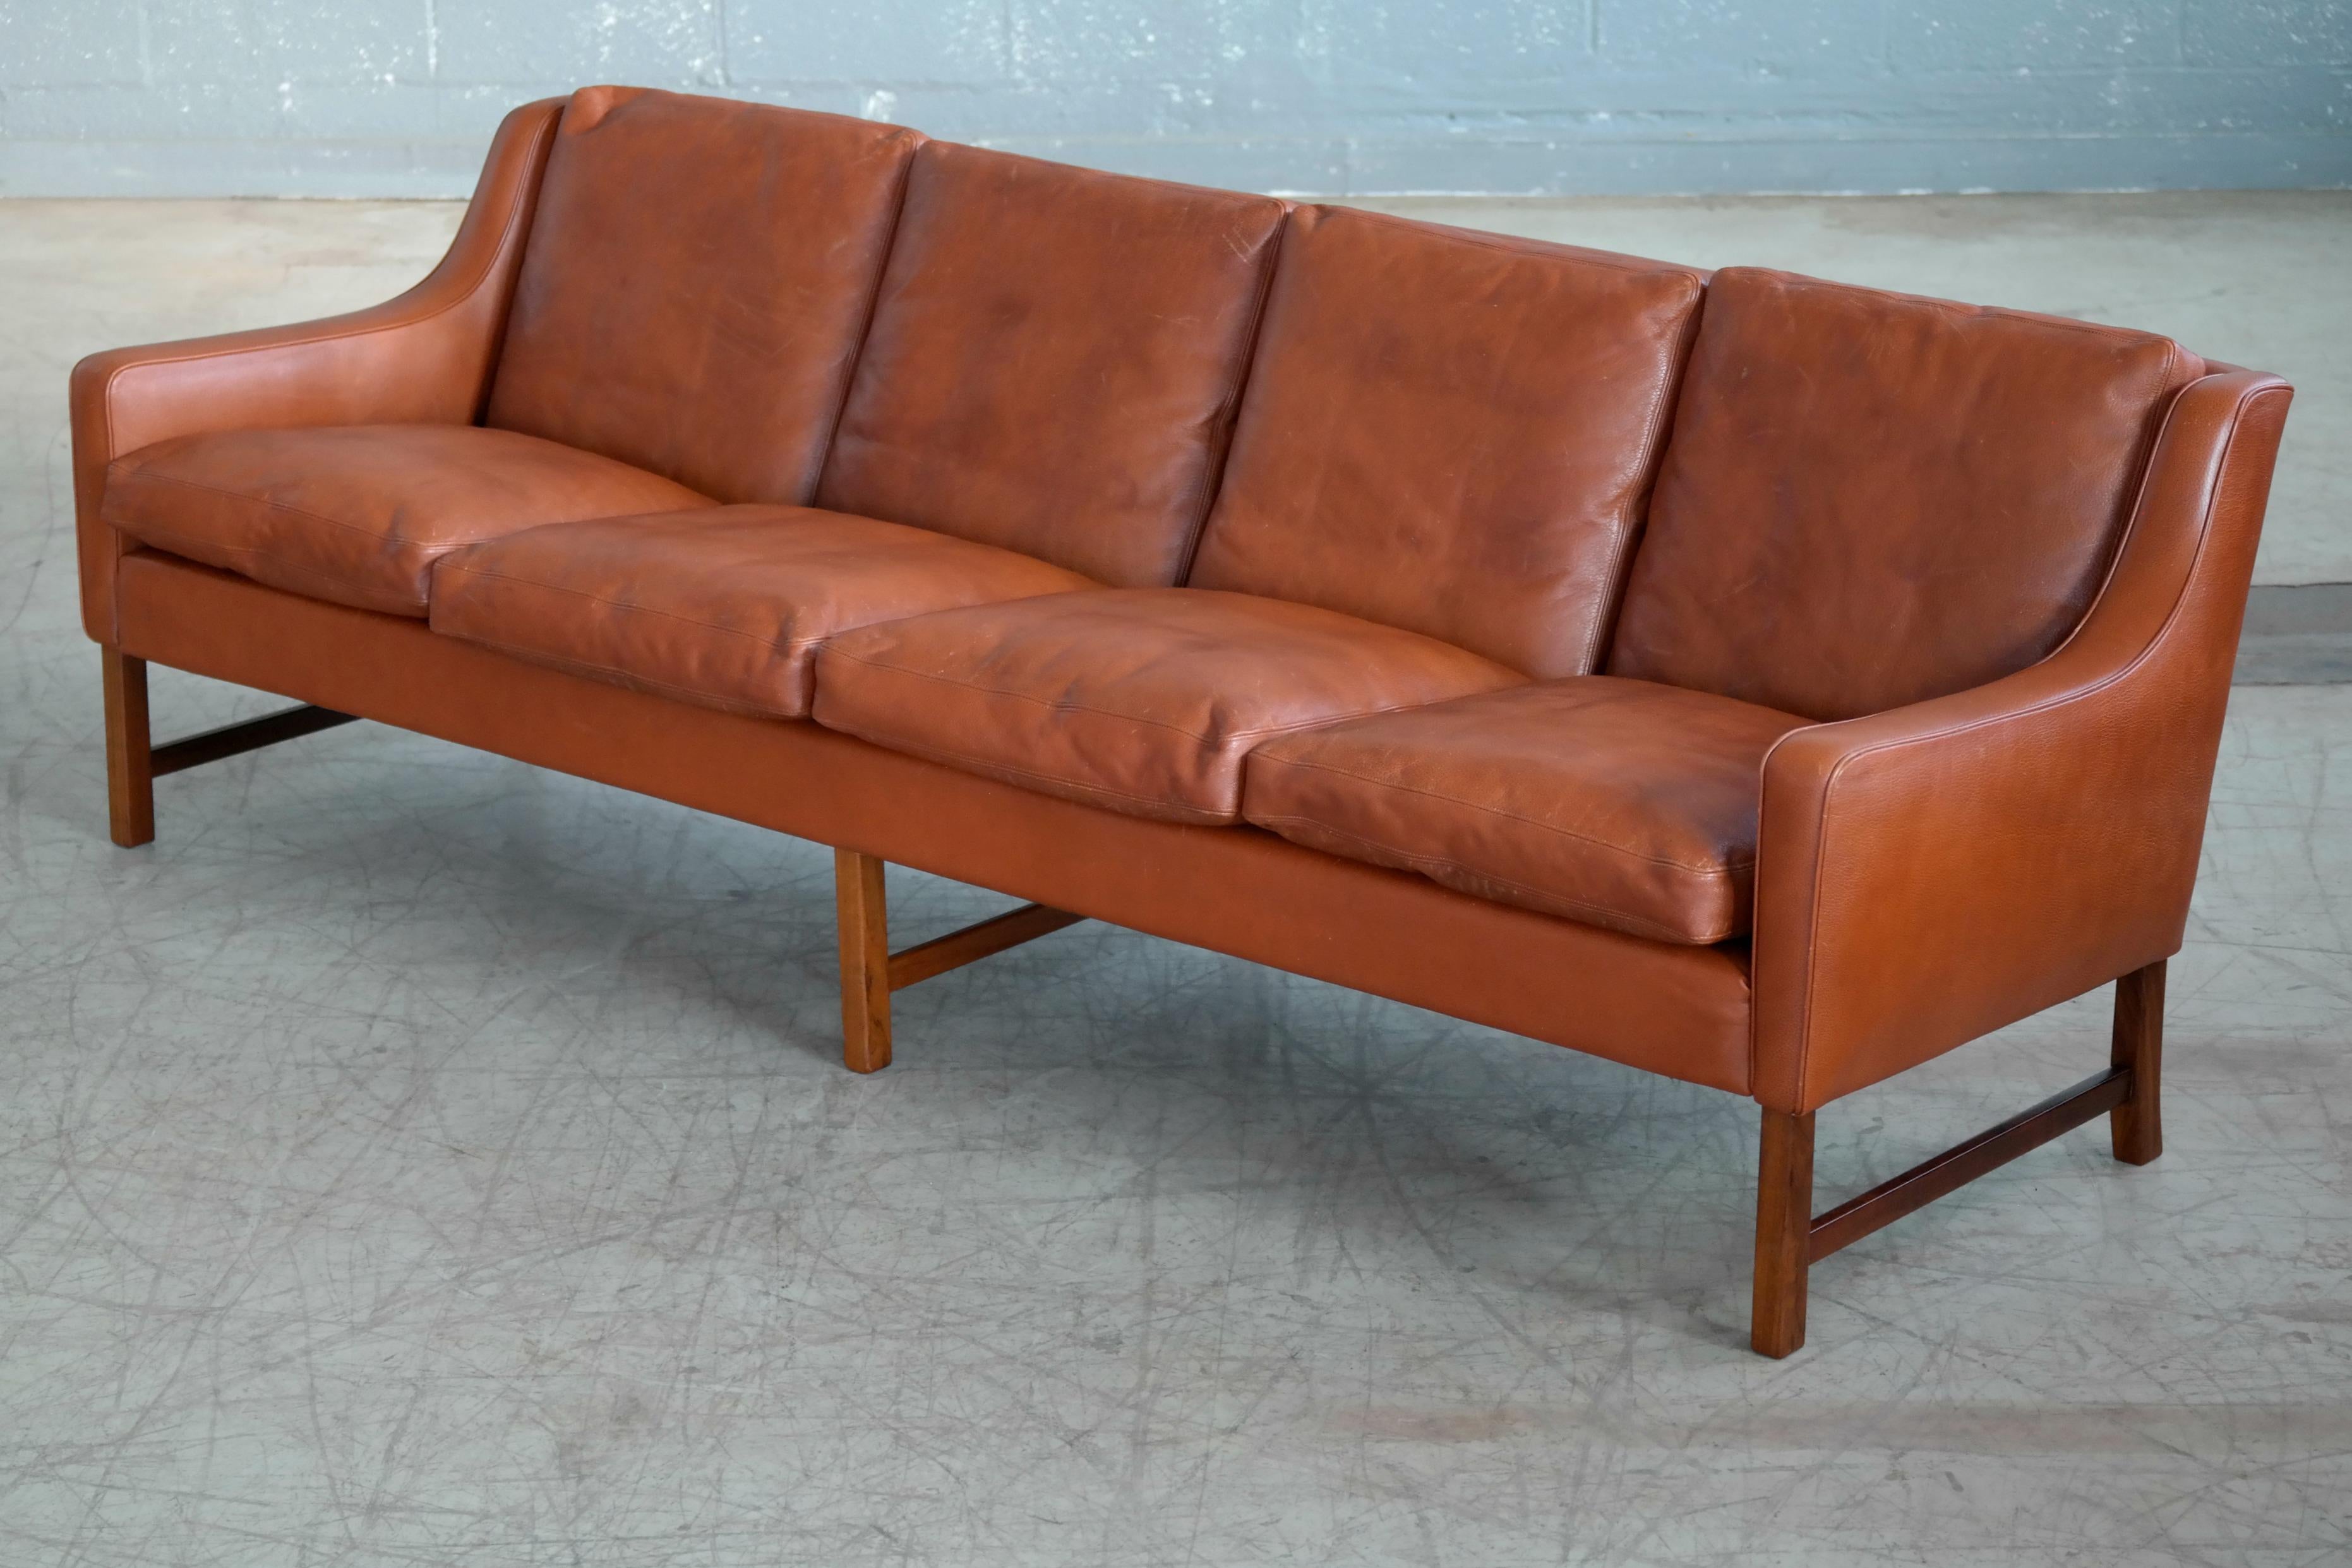 This very elegant and generously sized four-seat sofa was designed
by one of Norway's most iconic Designers, Fredrik A. Kayser for Vatne sometime in the late 1960s as model 965. We estimate the manufacture to have been in the early 1970s. It's rare